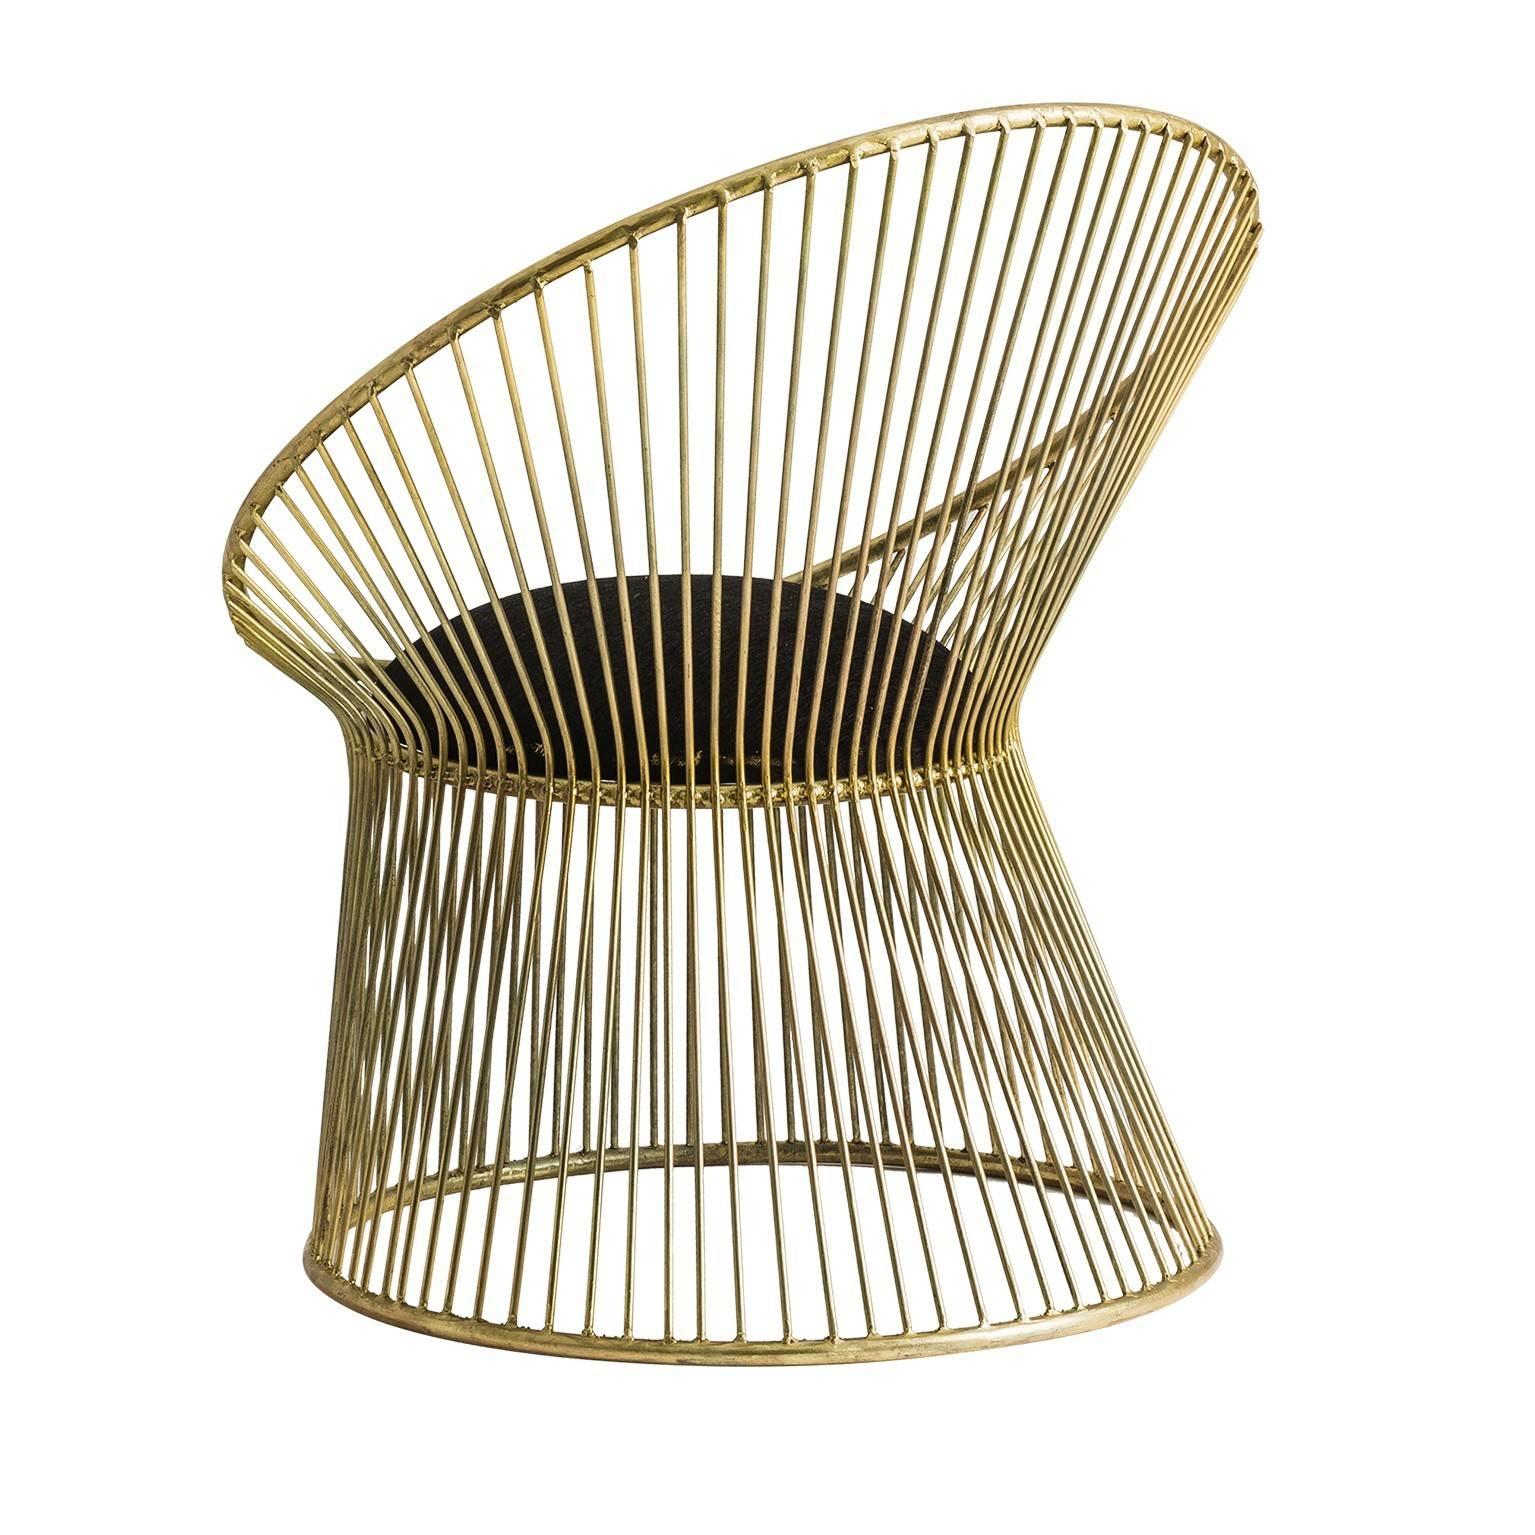 Contemporary Armchair in steel wires